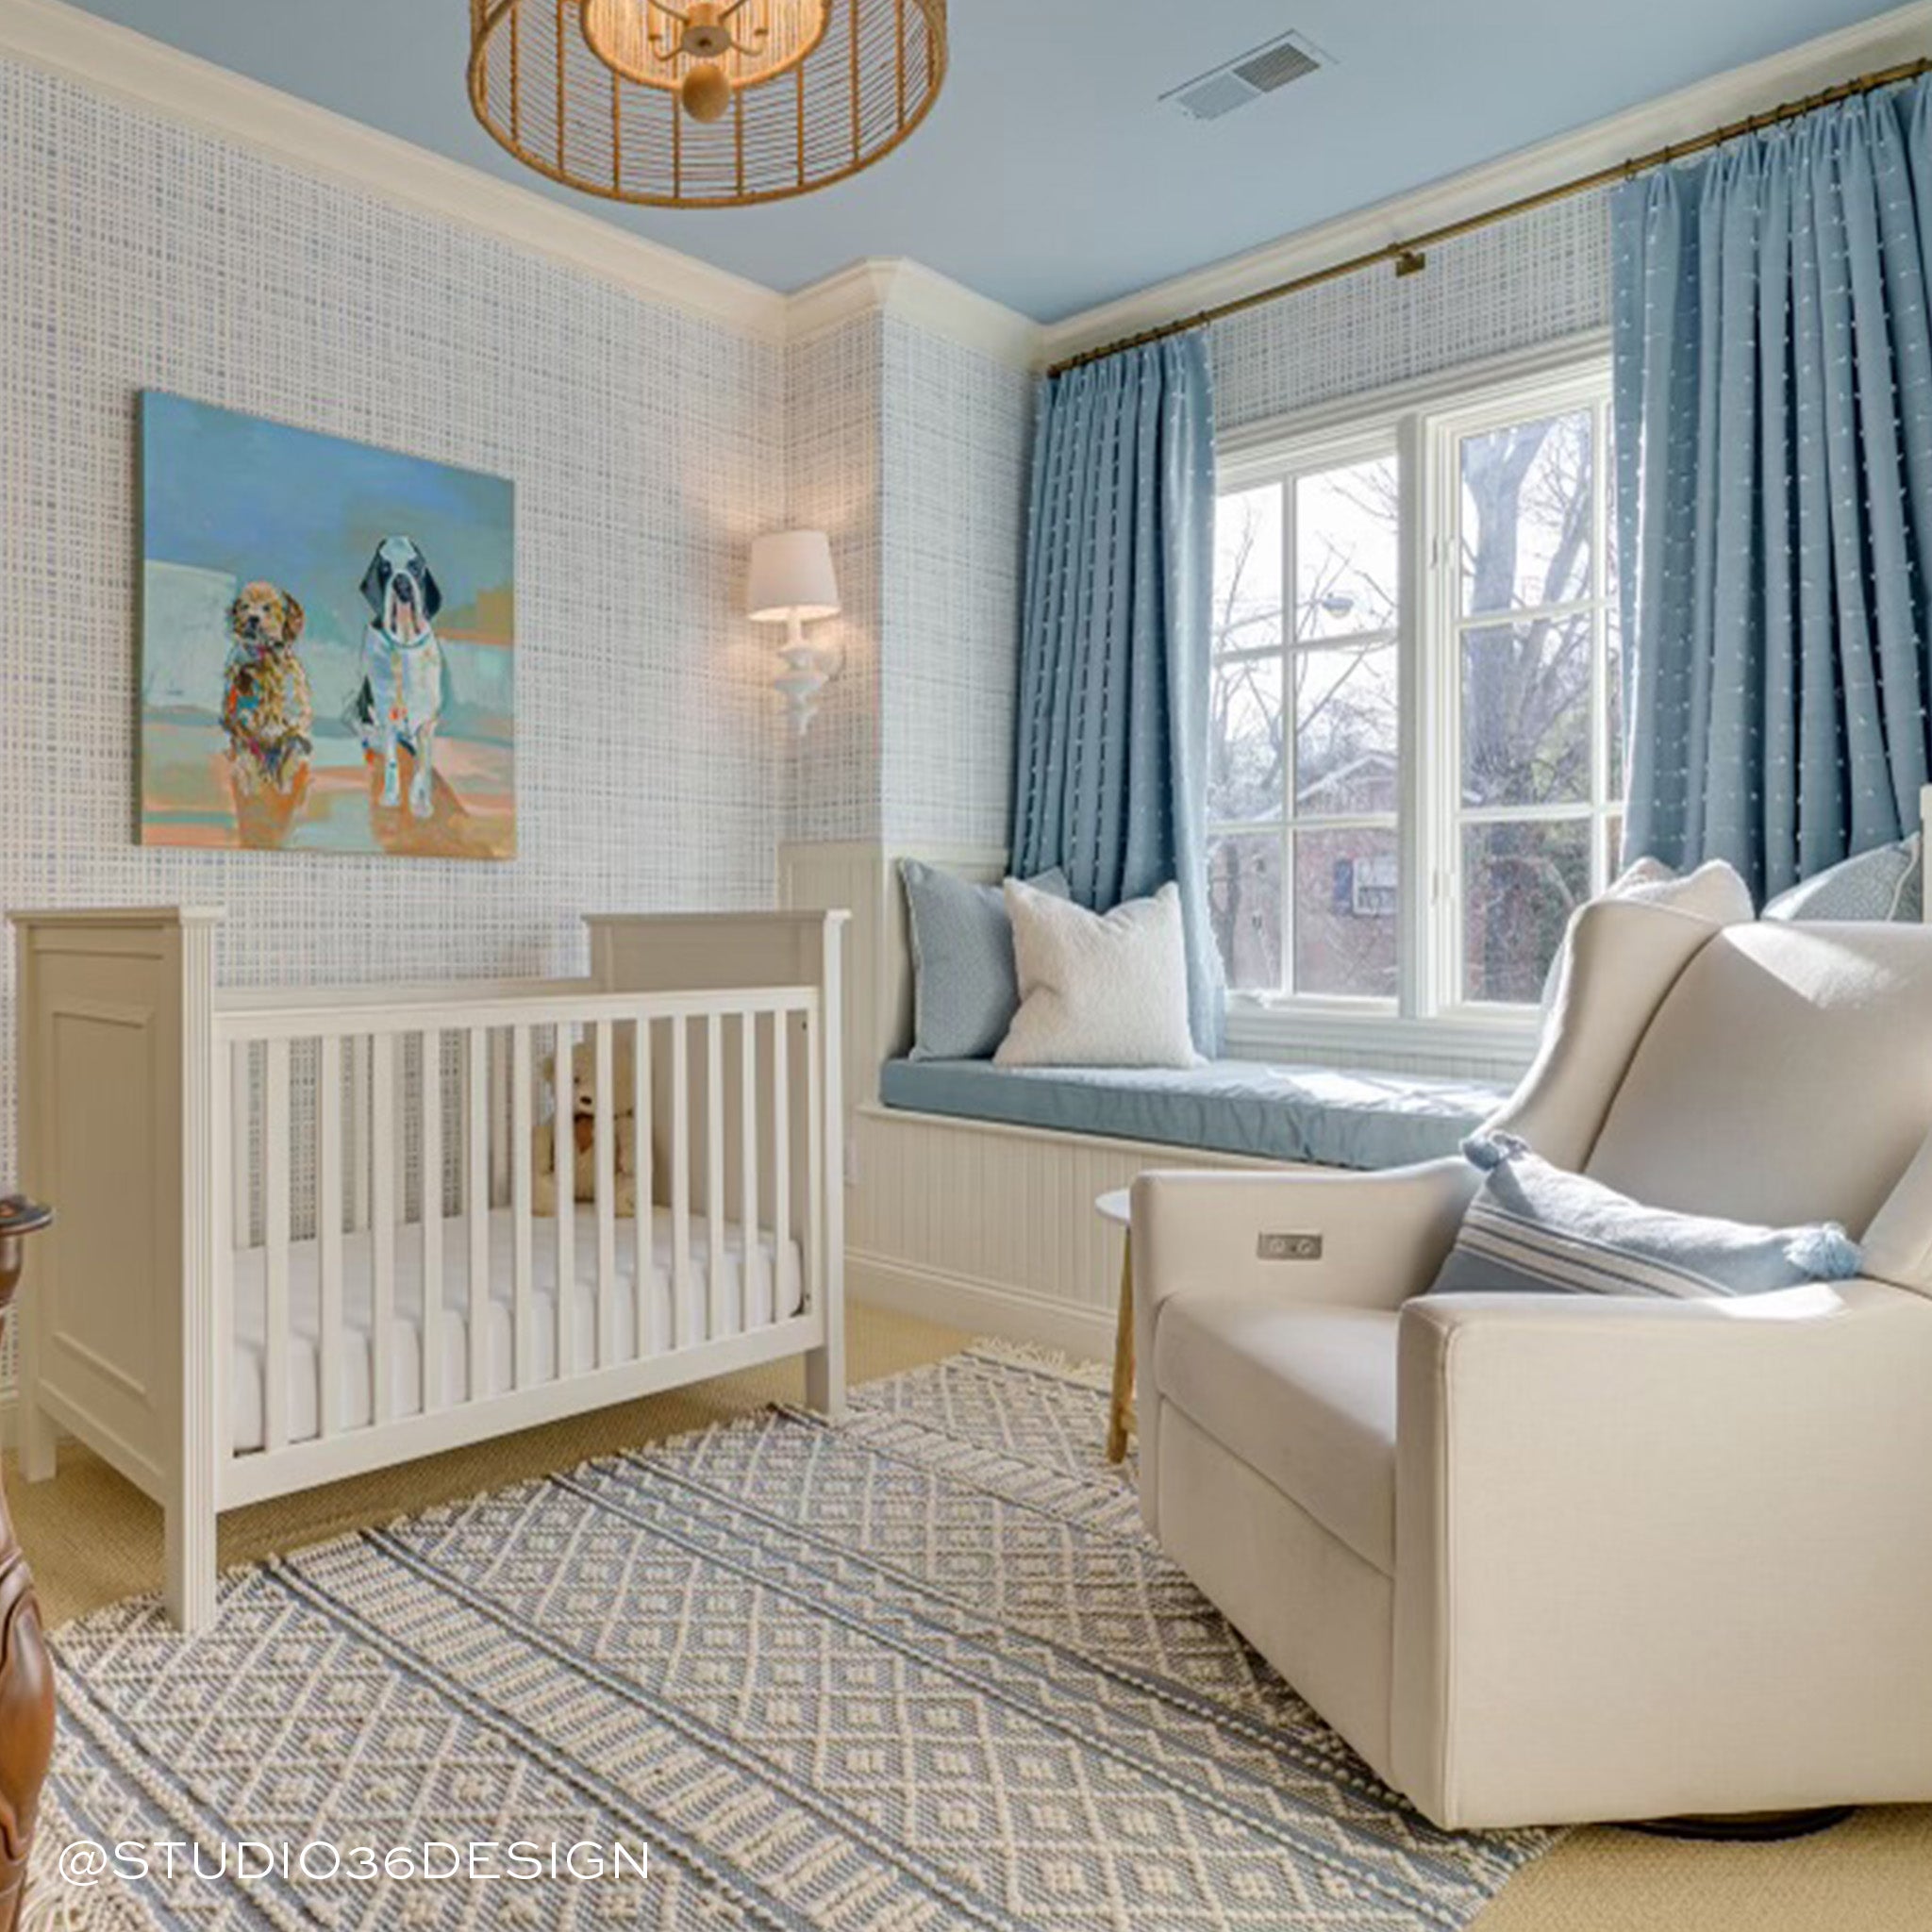 Nursery room styled with Sky Blue Gingham Printed Wallpaper next to white crib and white sofa couch by window with blue curtains and white and blue pillow. Photo taken by Studio 36 Design